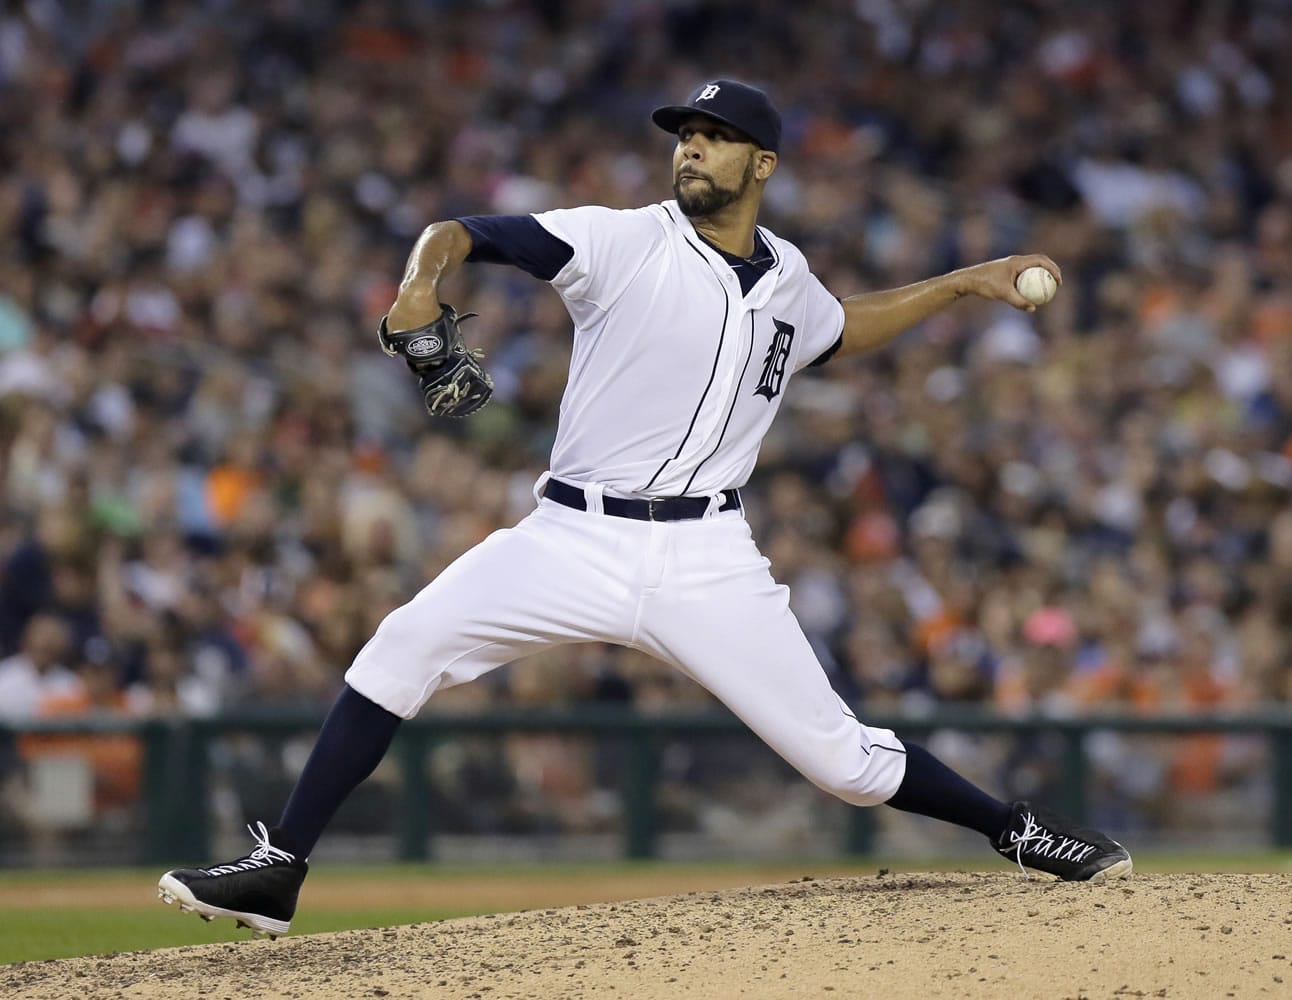 Detroit Tigers pitcher David Price pitched eight innings of one-hit ball against the Seattle Mariners on Saturday, in Detroit. The Tigers won 4-2.